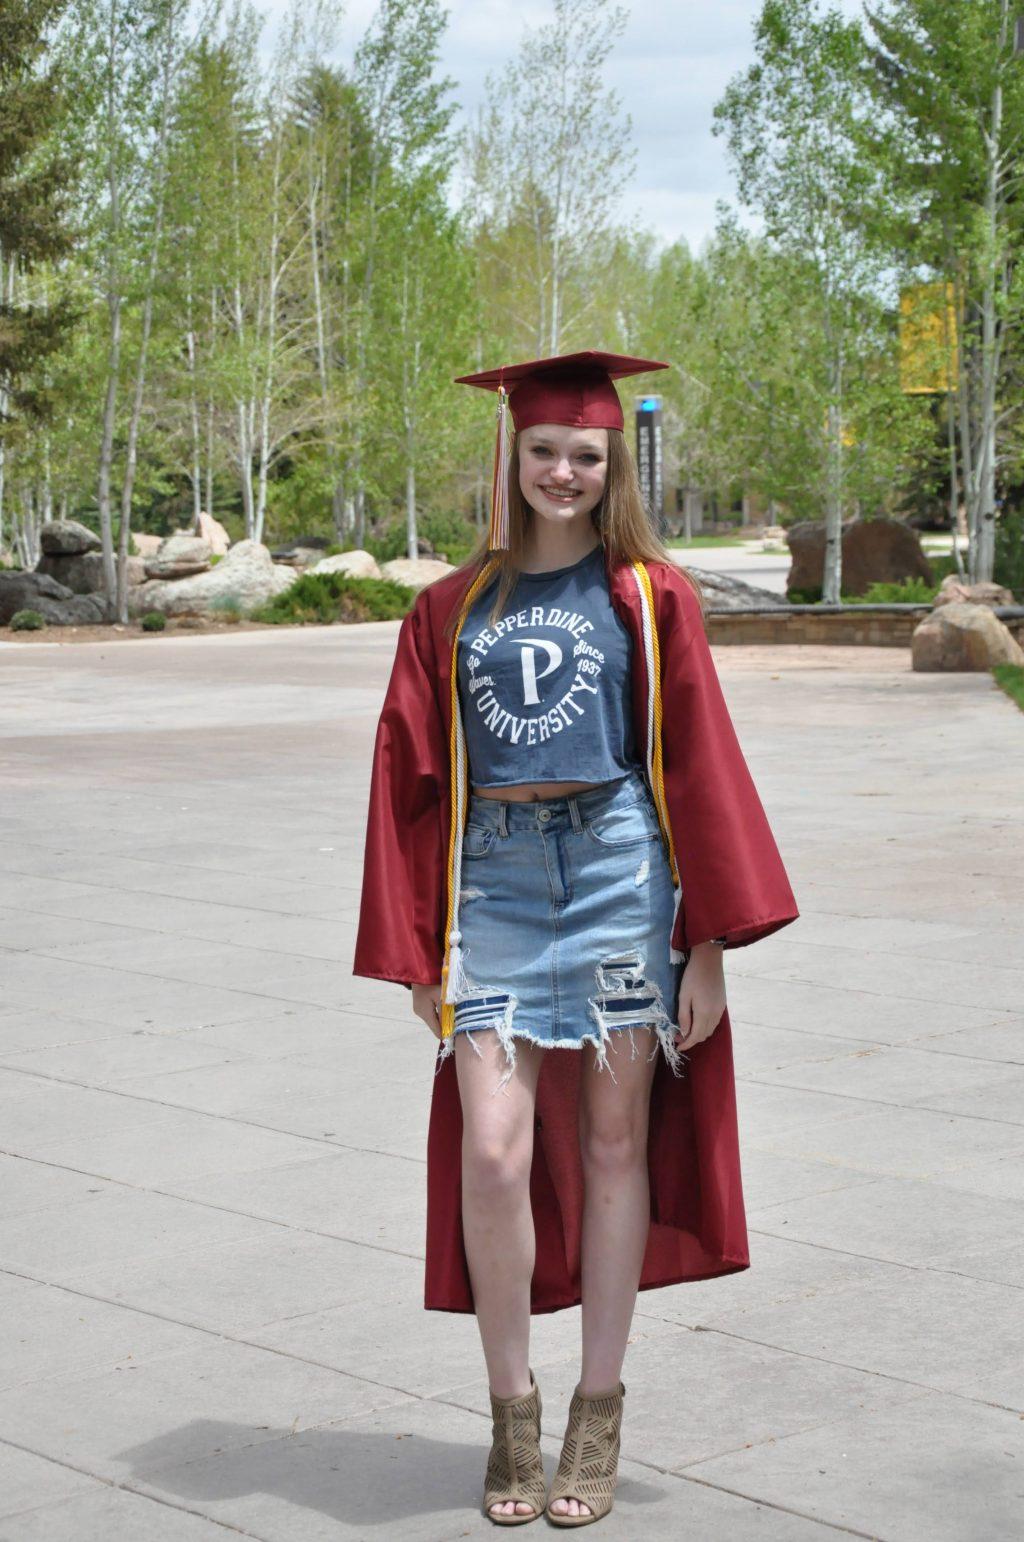 Douville commemorates the day of her graduation in May by taking photos on the University of Wyoming campus. She said she looks forward to joining various clubs and organizations at Pepperdine.